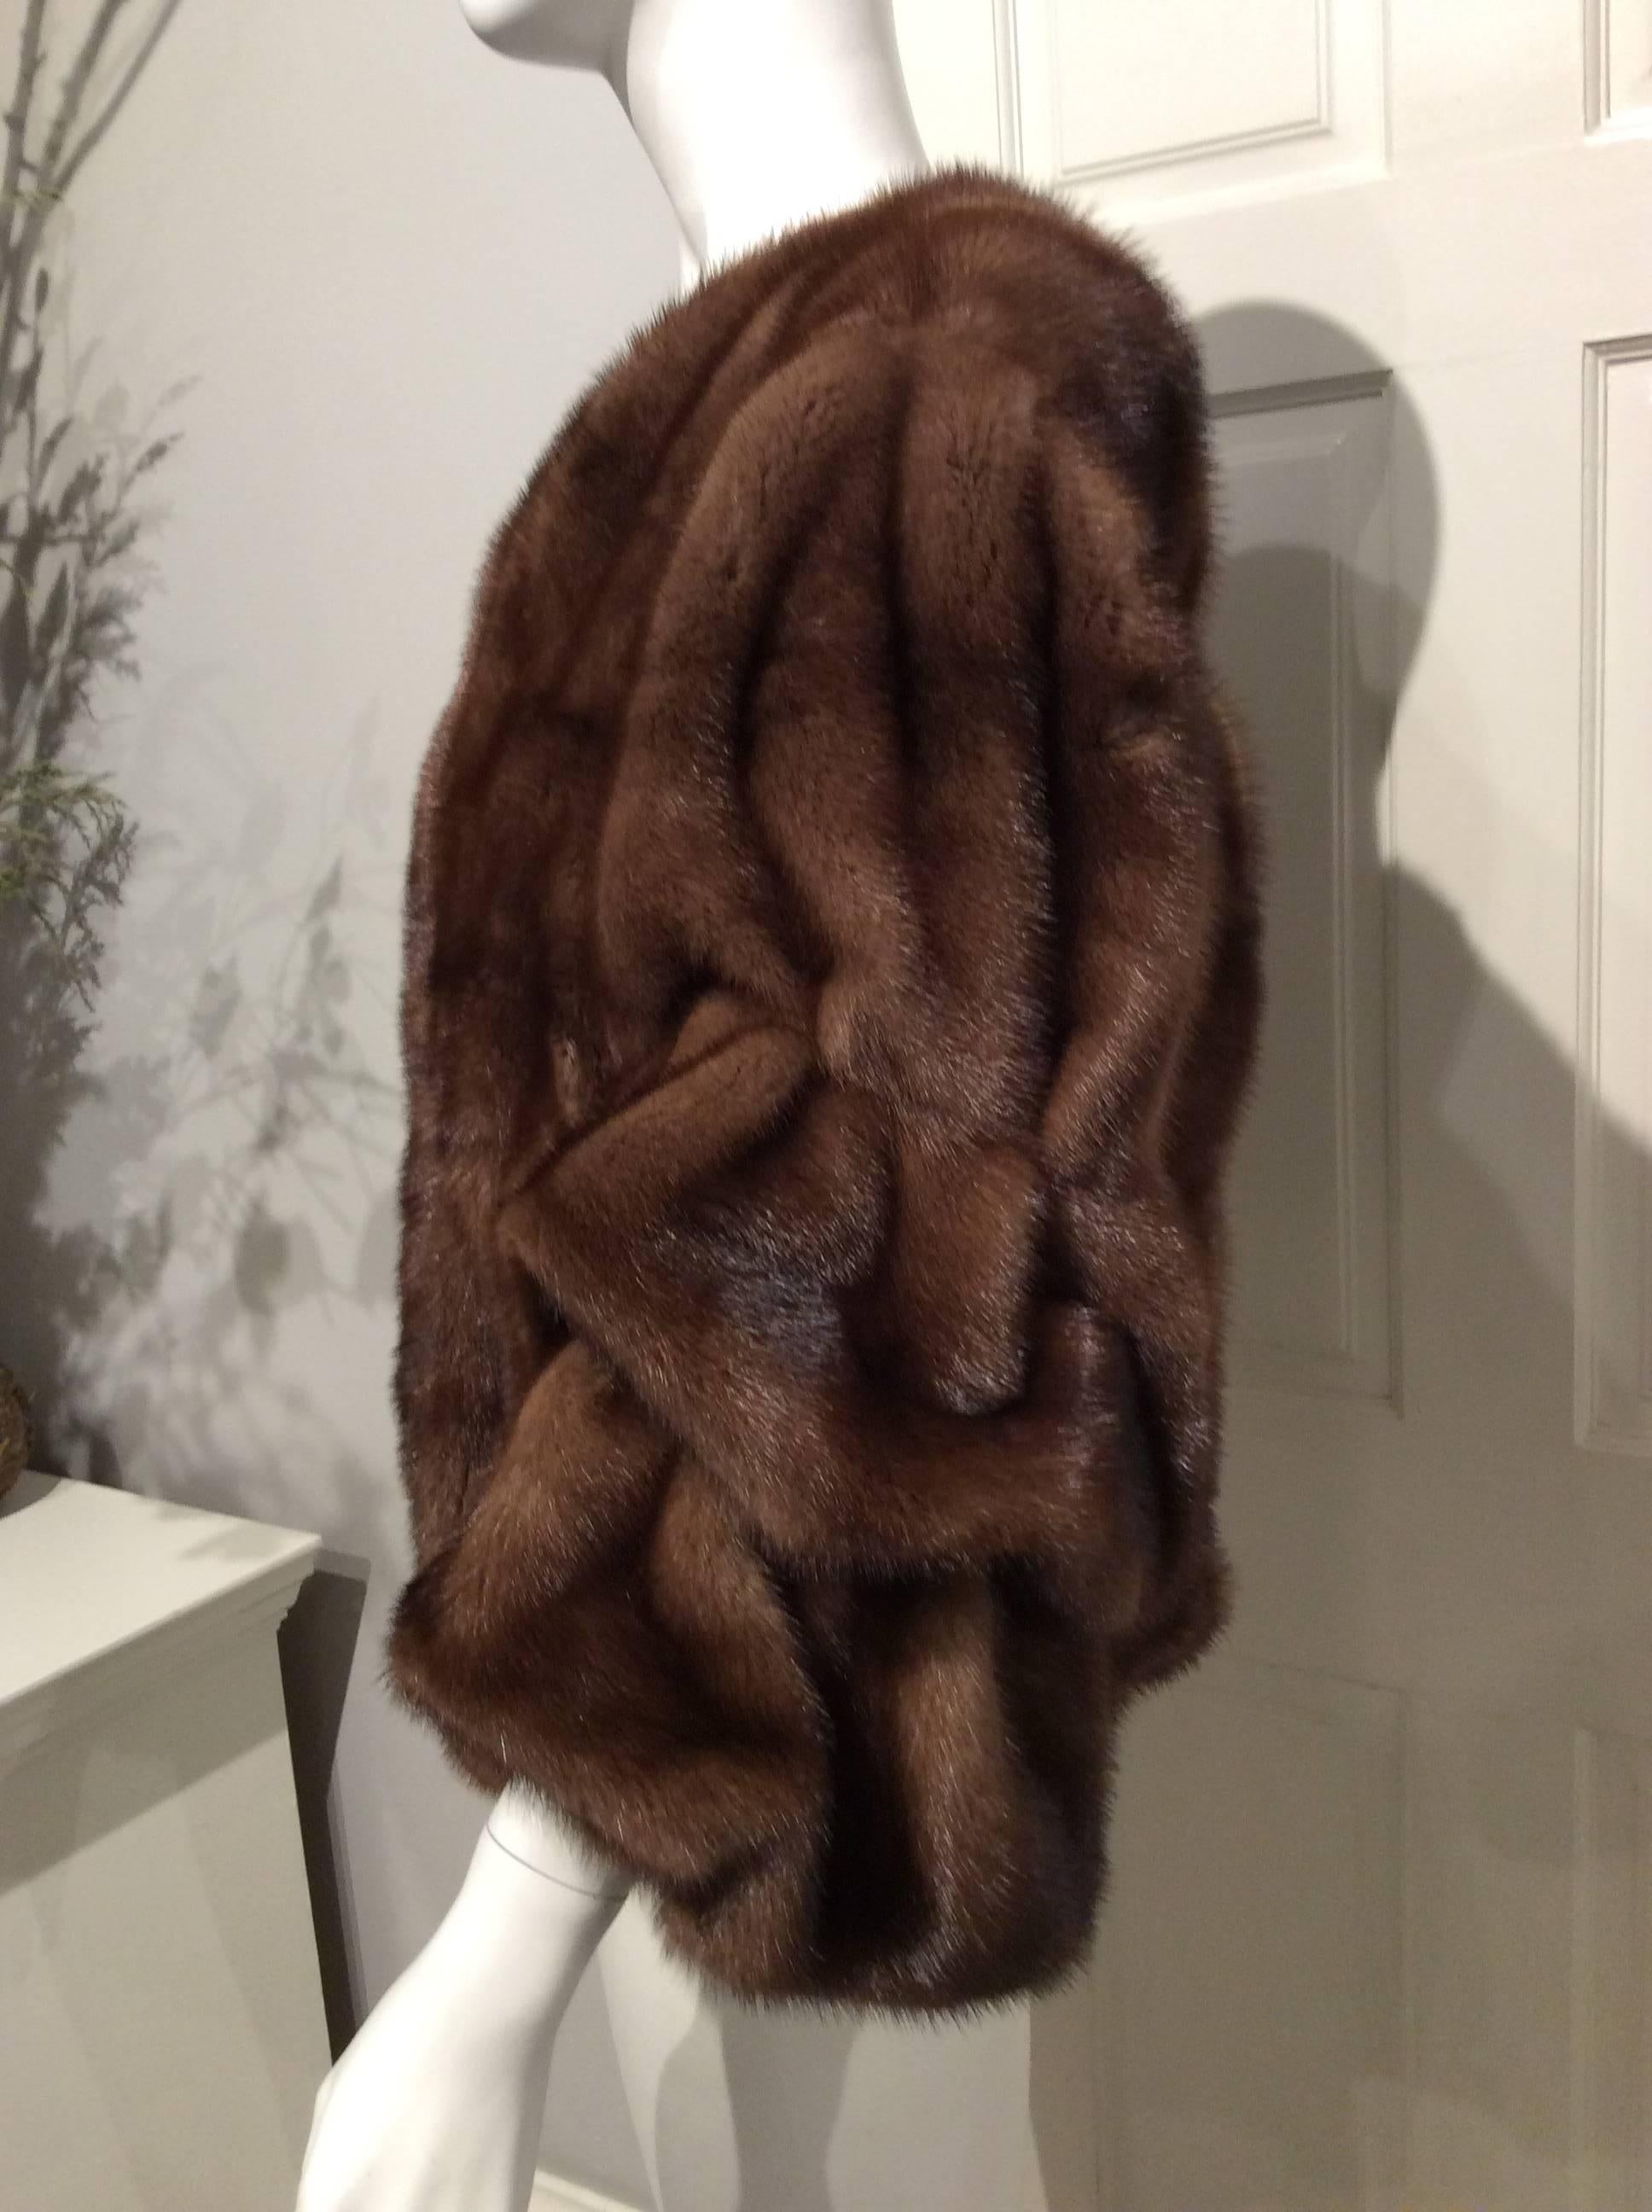 Lanvin Brown Collarless Mink Jacket With Tiered Full Sleeves Sz40 (Us8) In Excellent Condition For Sale In San Francisco, CA